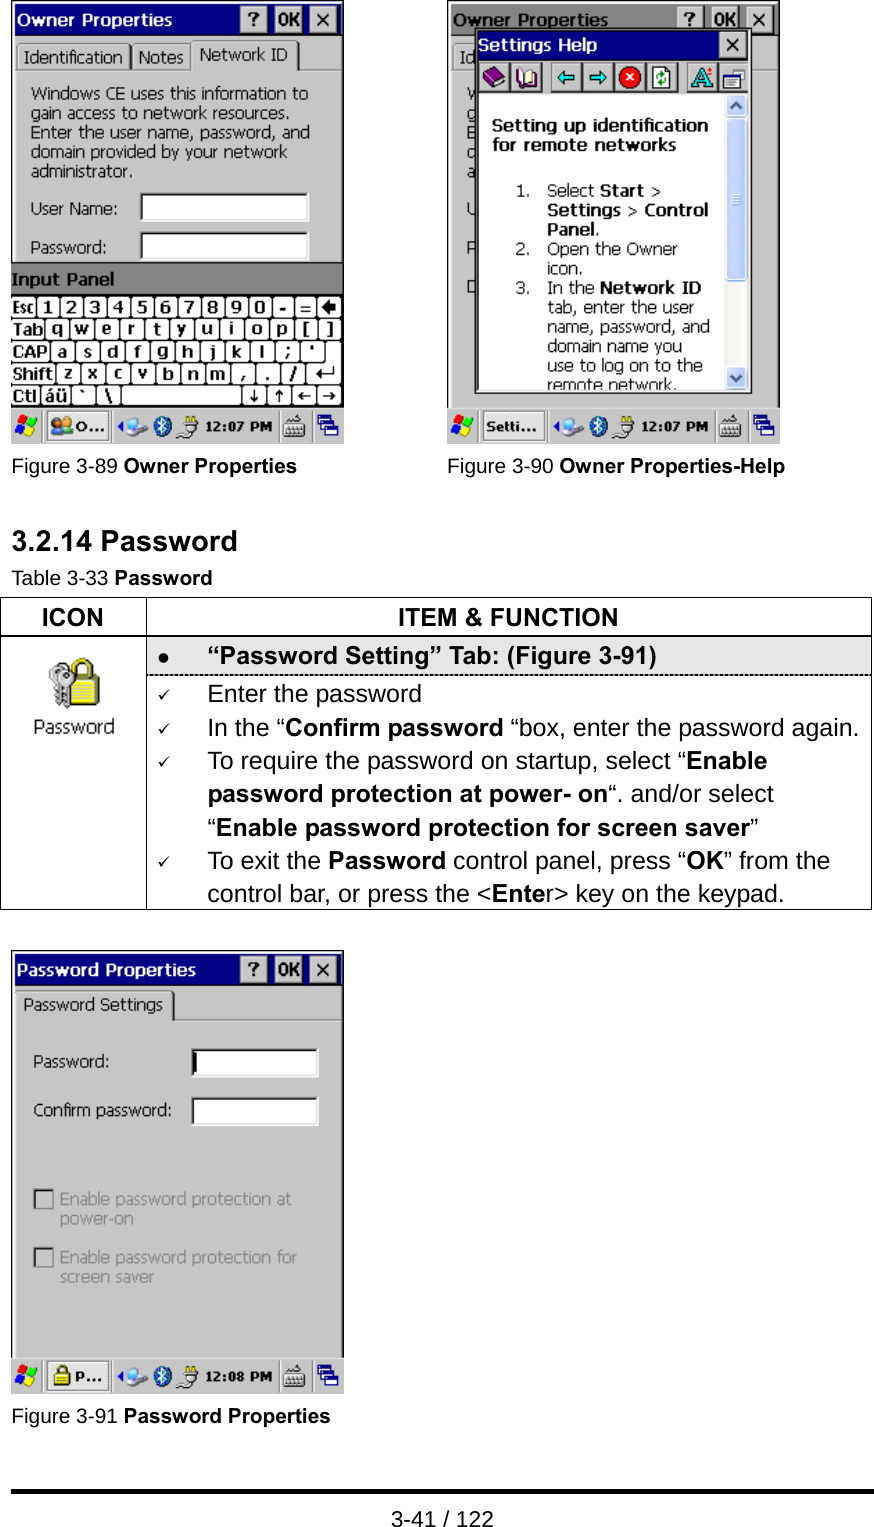  3-41 / 122    Figure 3-89 Owner Properties  Figure 3-90 Owner Properties-Help  3.2.14 Password Table 3-33 Password ICON  ITEM &amp; FUNCTION z “Password Setting” Tab: (Figure 3-91)  9 Enter the password 9 In the “Confirm password “box, enter the password again.9 To require the password on startup, select “Enable password protection at power- on“. and/or select “Enable password protection for screen saver” 9 To exit the Password control panel, press “OK” from the control bar, or press the &lt;Enter&gt; key on the keypad.    Figure 3-91 Password Properties   